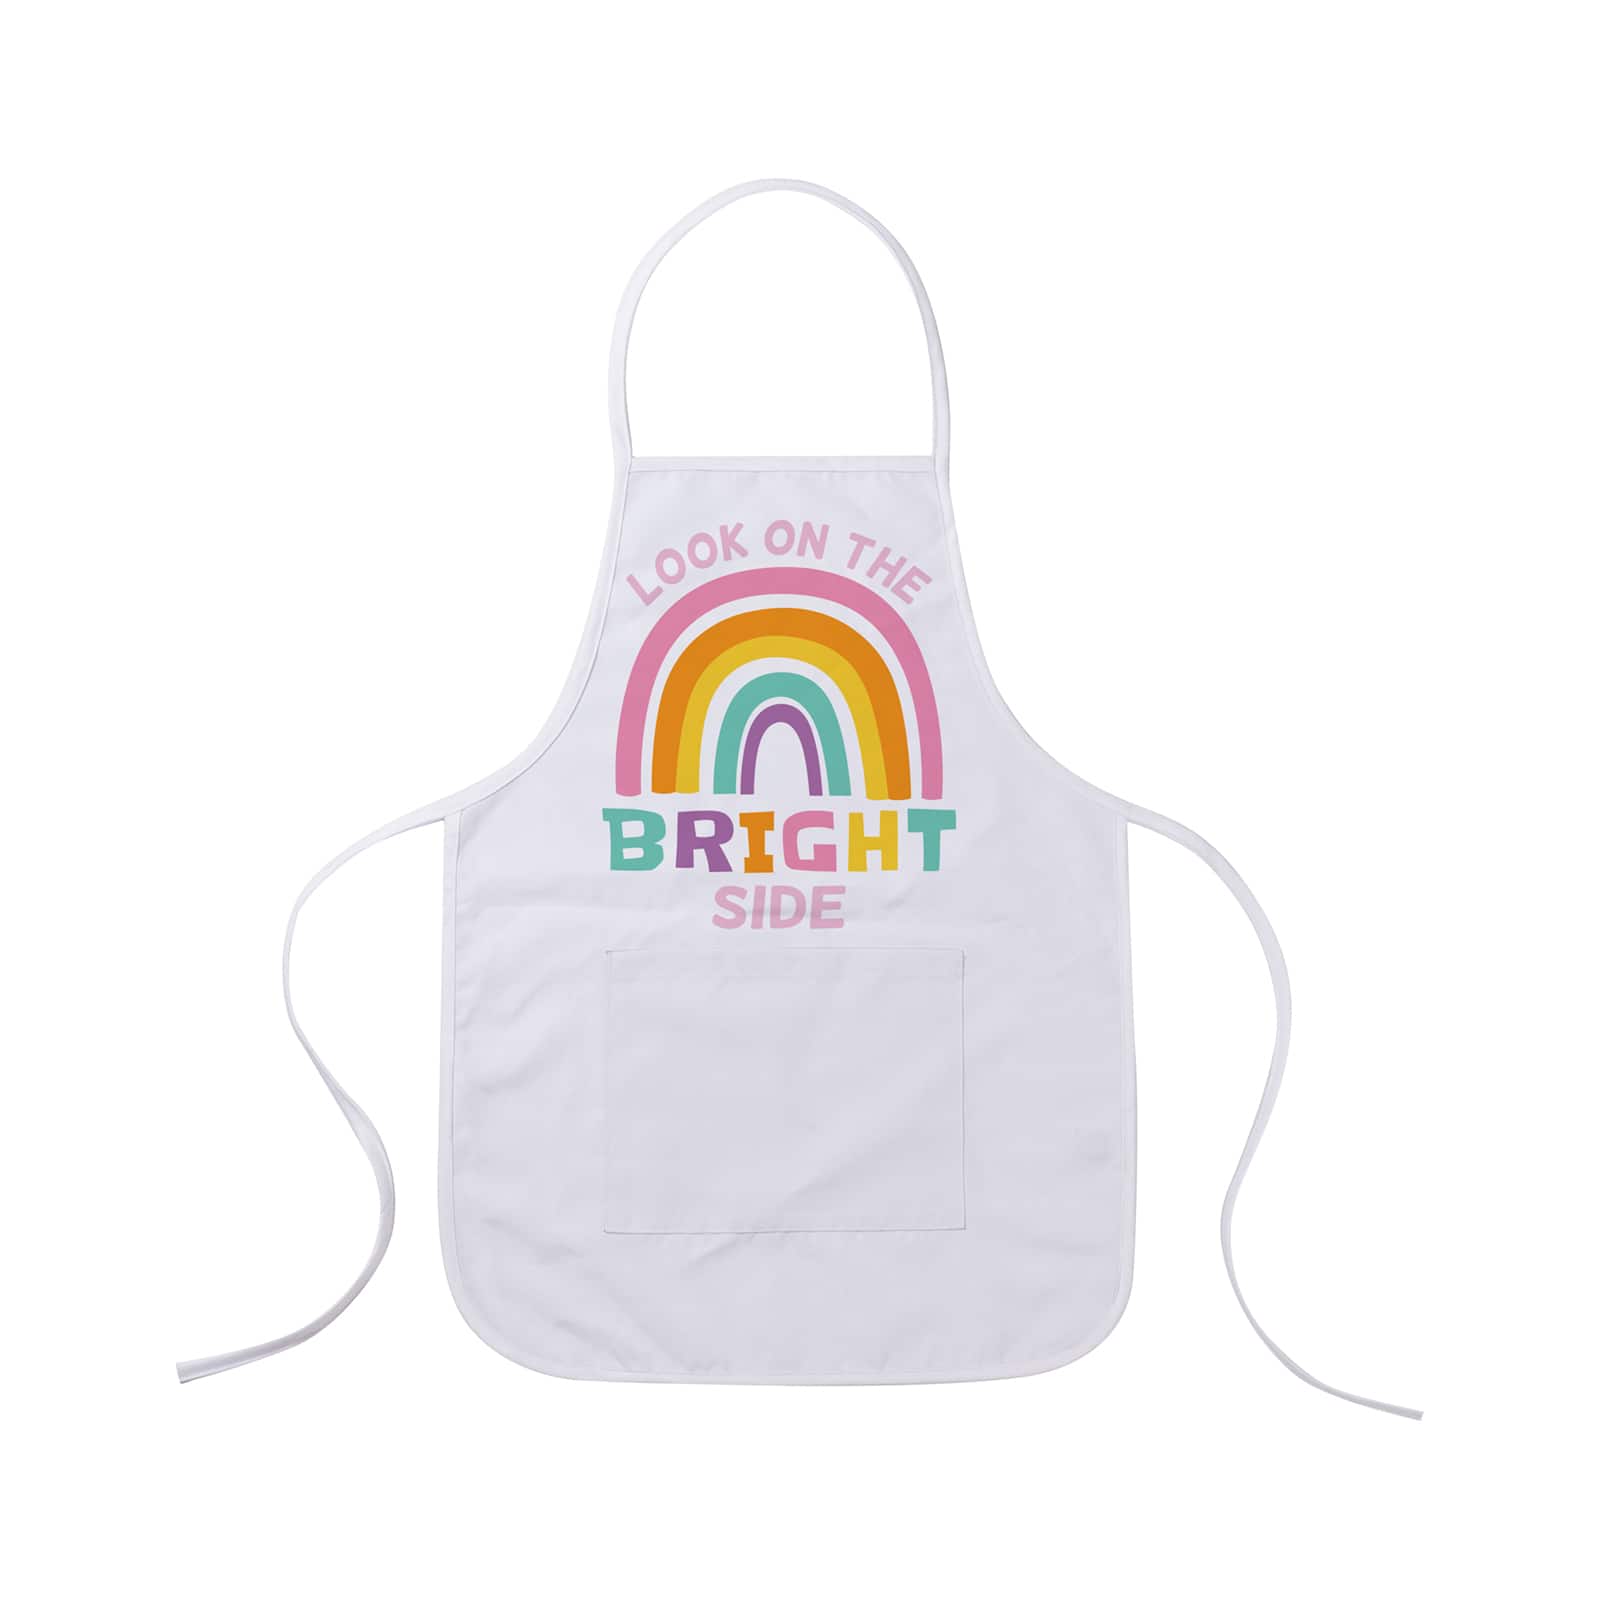 Craft Express White Sublimation Child Aprons with White Pocket, 2ct.